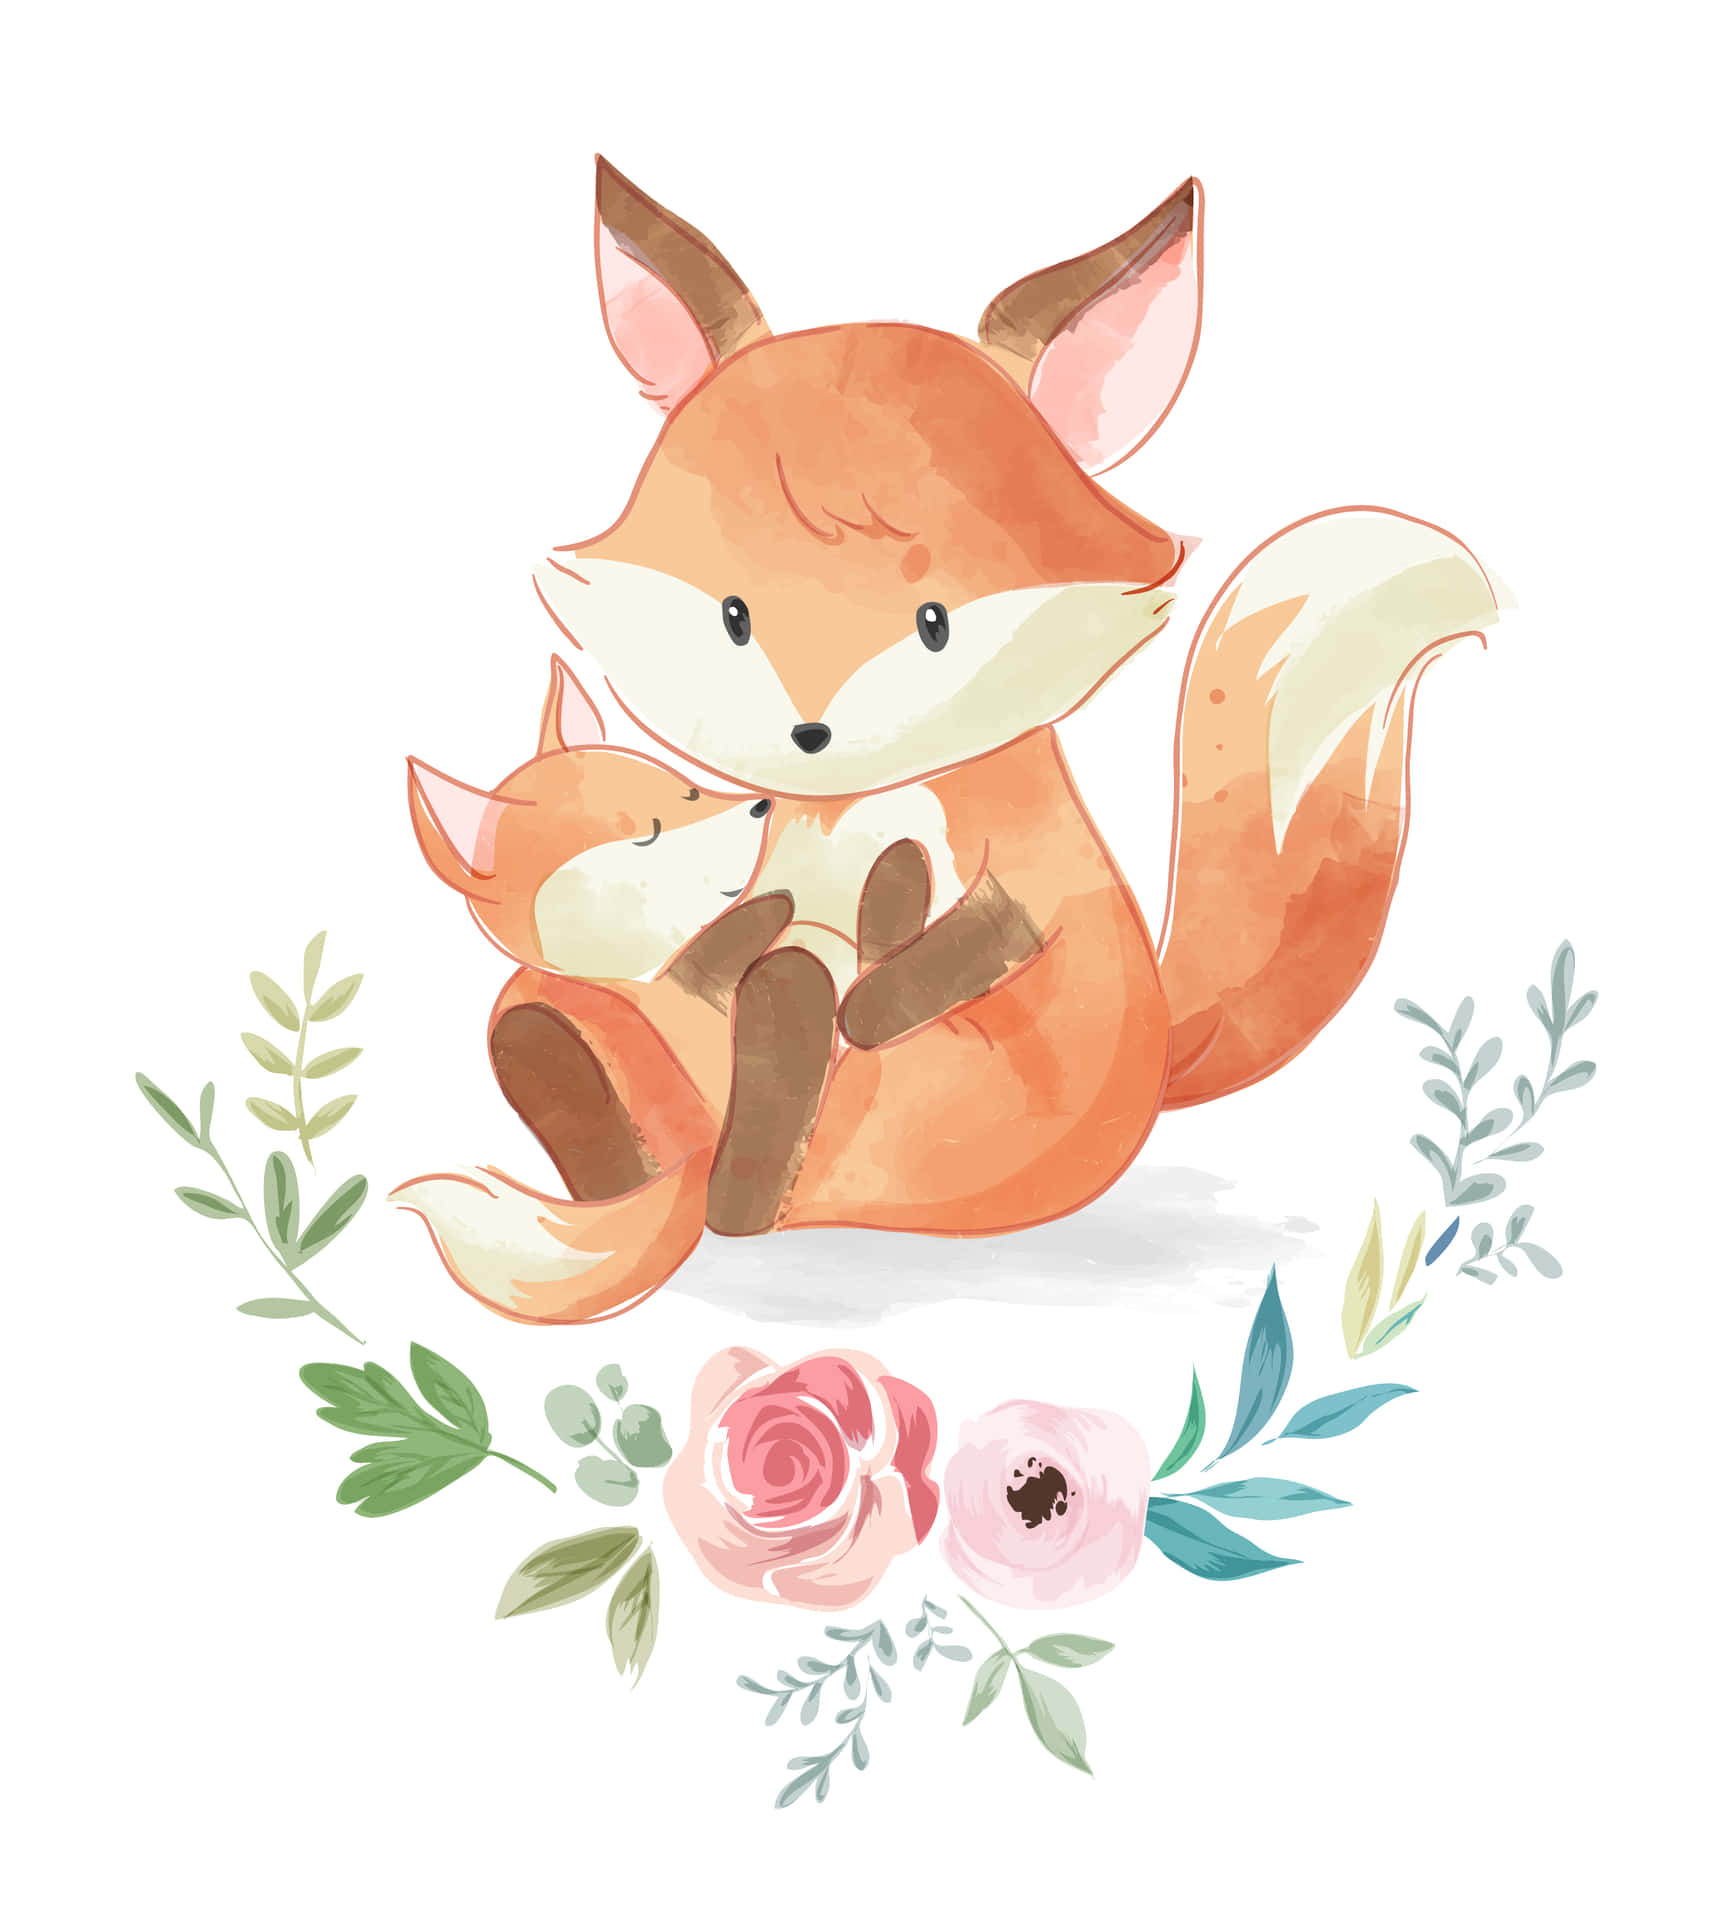 "Look at this Adorable Little Fox!"